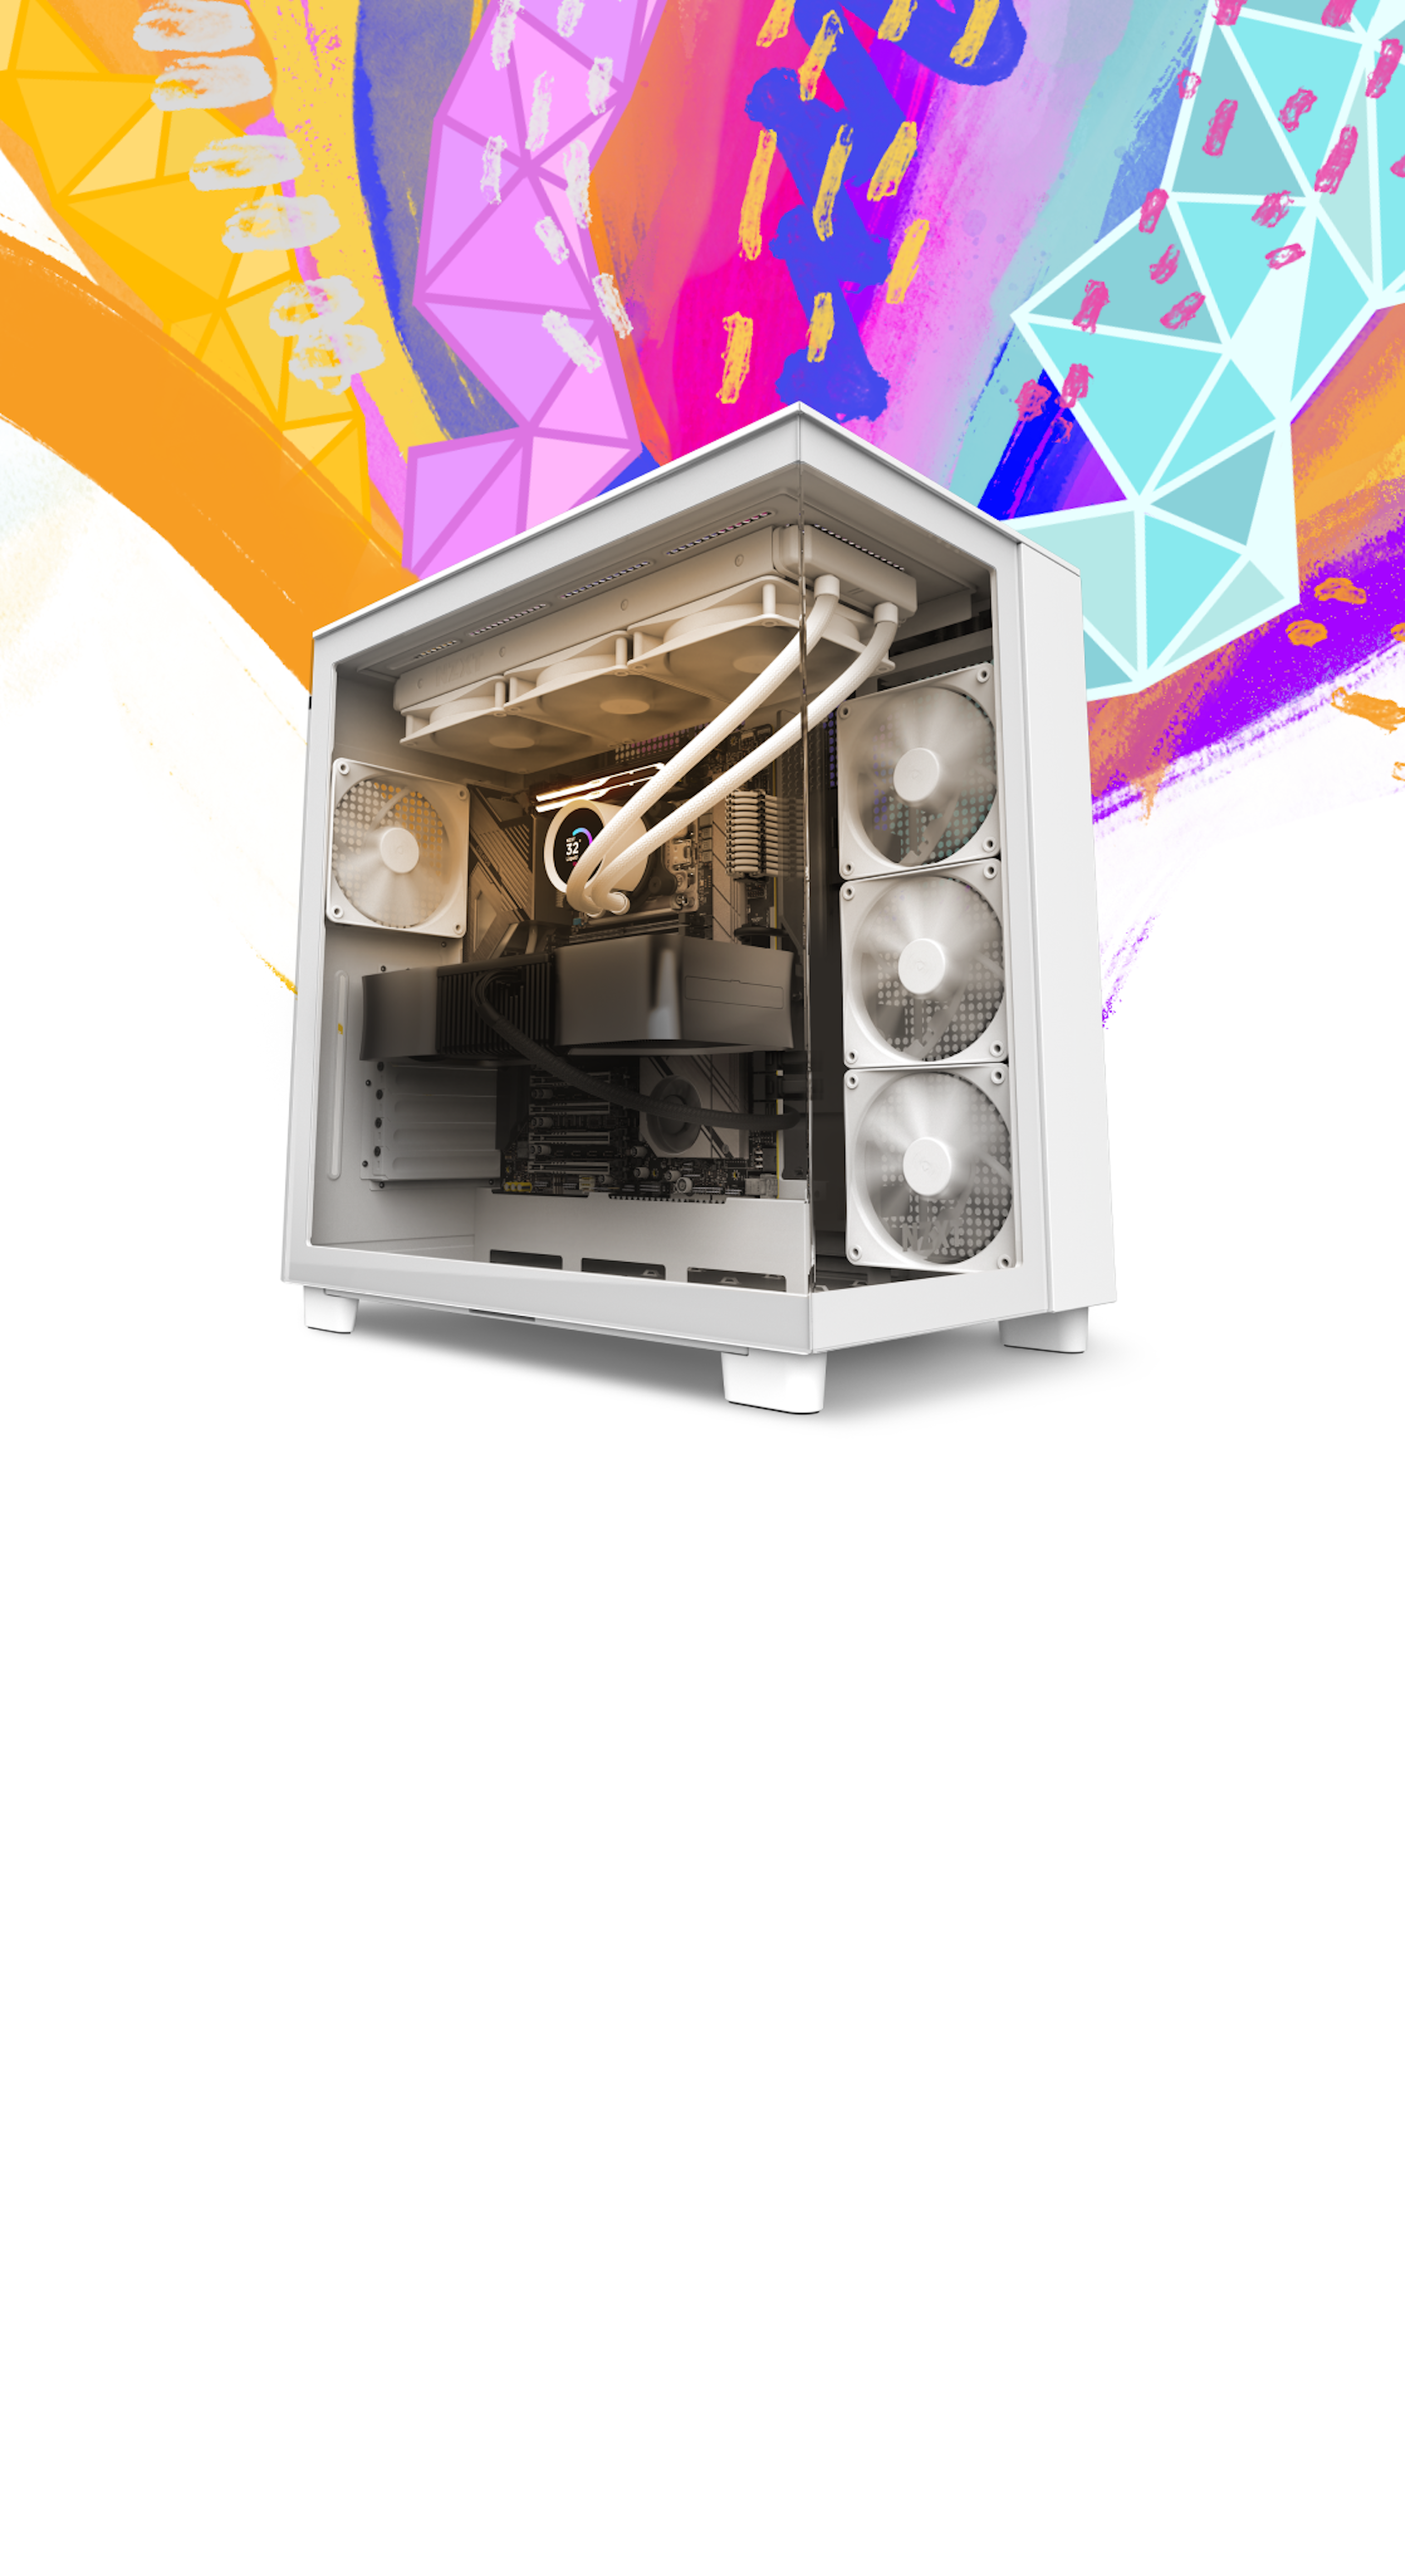 White NZXT Creator PC with orange RGB lighting and paint strokes in background